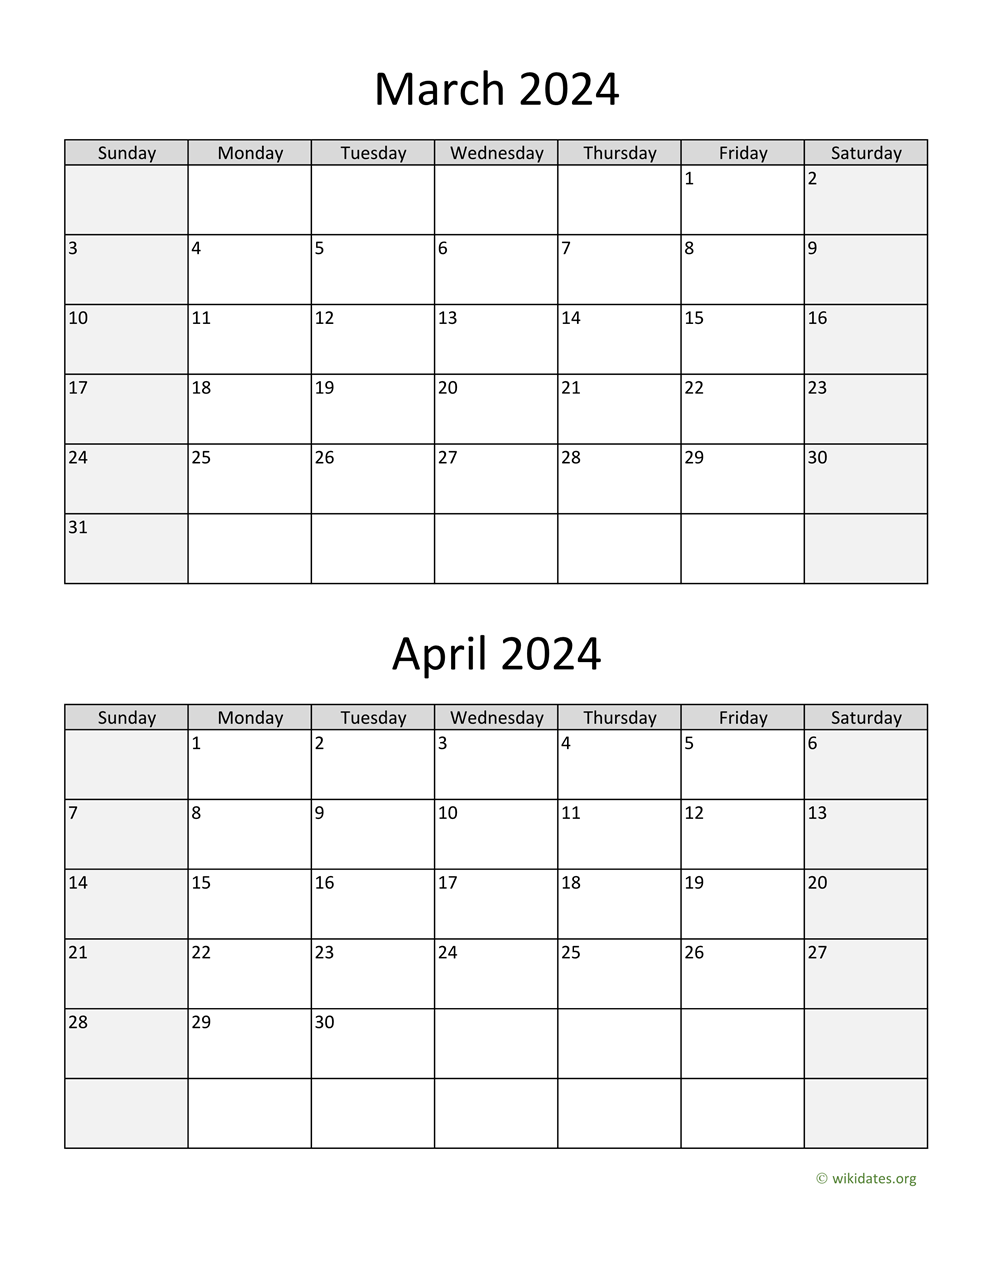 March And April 2024 Calendar | Wikidates for Calendar March April 2024 Printable